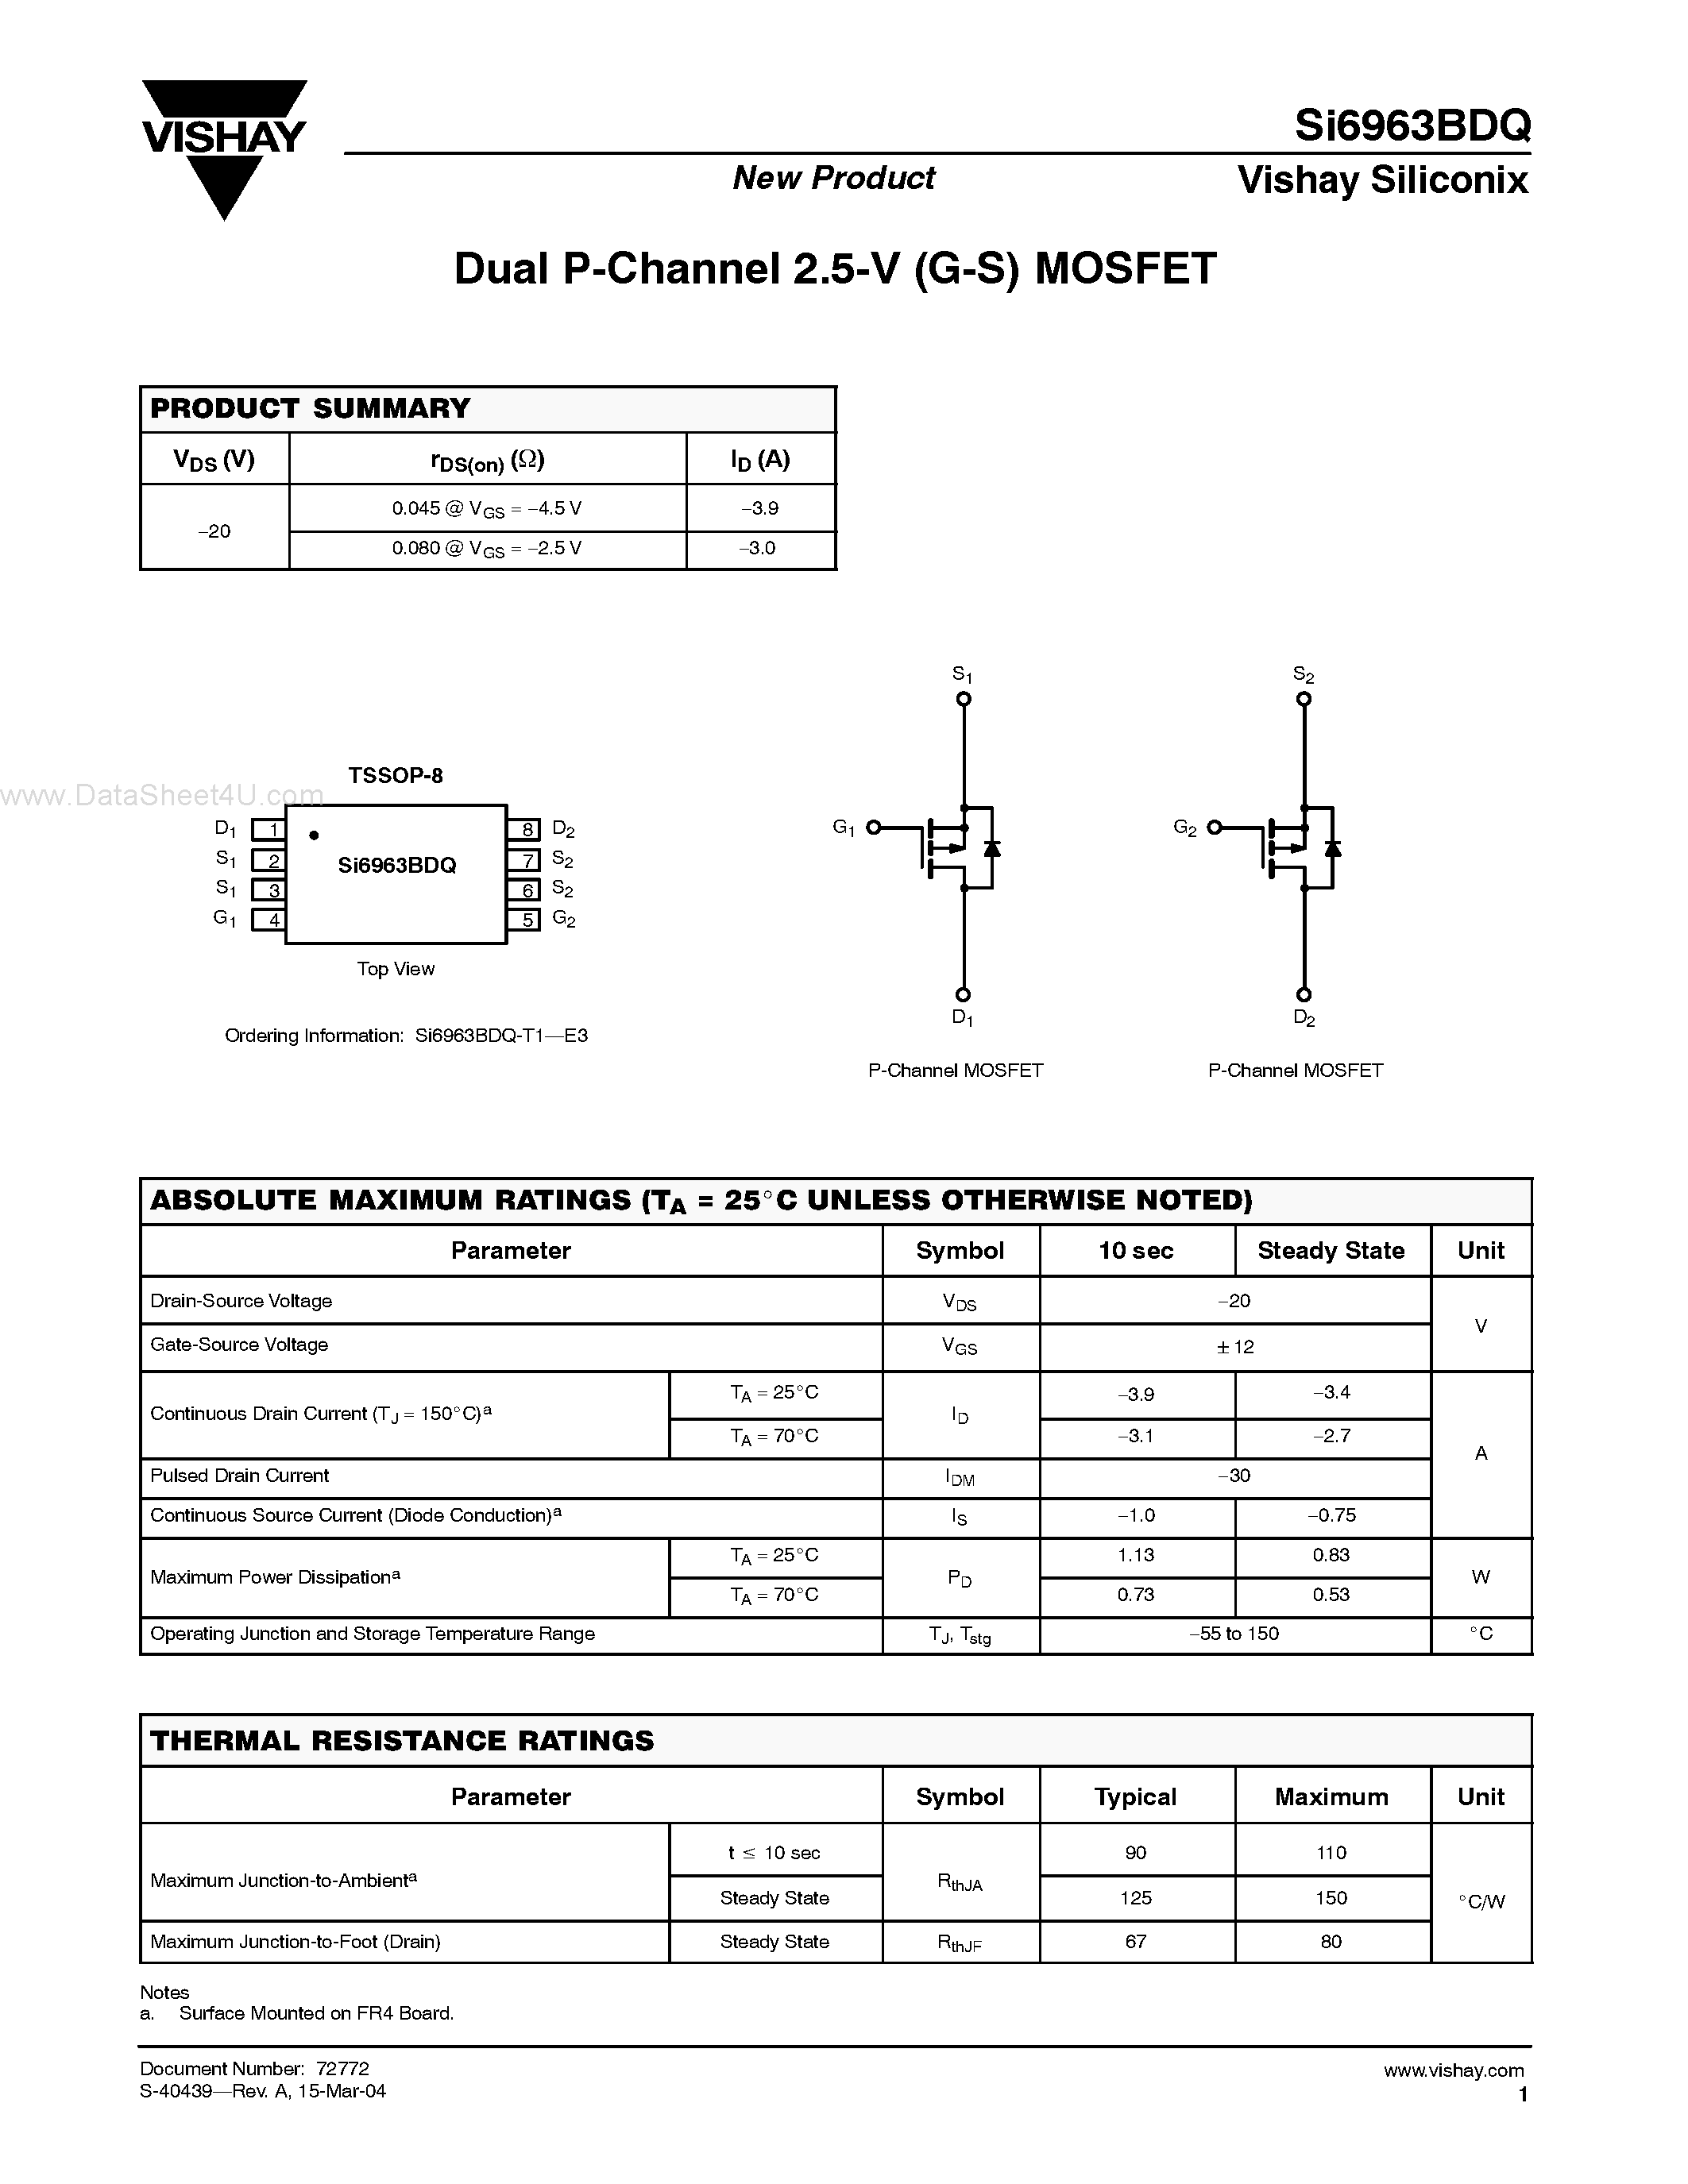 Даташит SI6963BDQ - Dual P-Channel 2.5-V (G-S) MOSFET страница 1